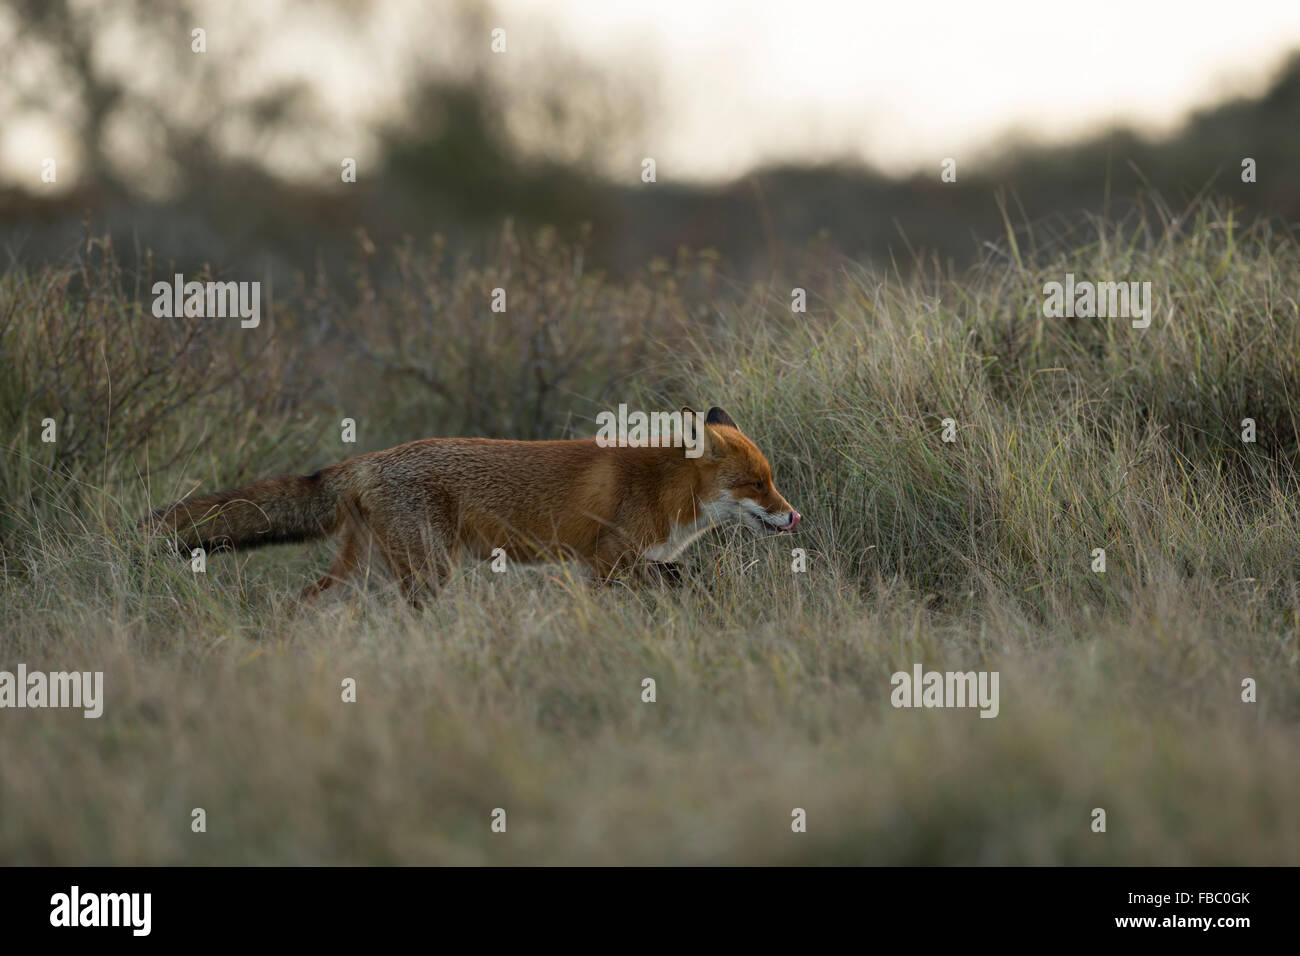 Red Fox / Rotfuchs ( Vulpes vulpes ) in soft backlight sneaks through high grass, searching for mice, licking its tongue. Stock Photo